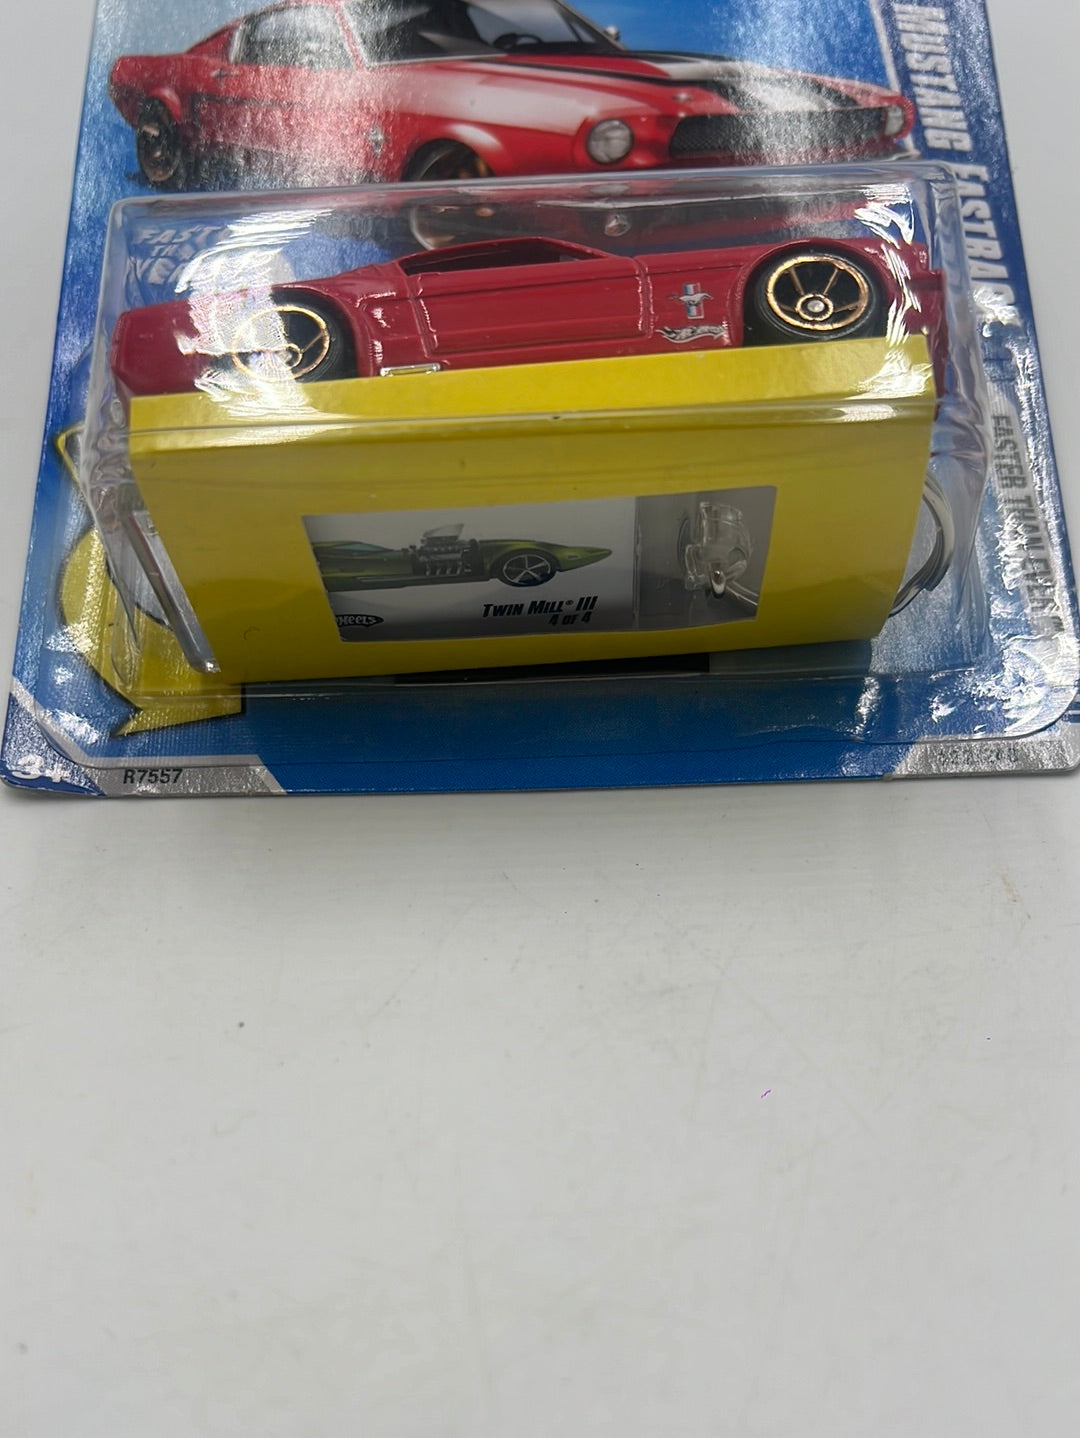 2010 Hot Wheels Faster Than Ever Ford Mustang Fastback Walmart Exclusive Twin Mill Key Chain Red 132/240 235B